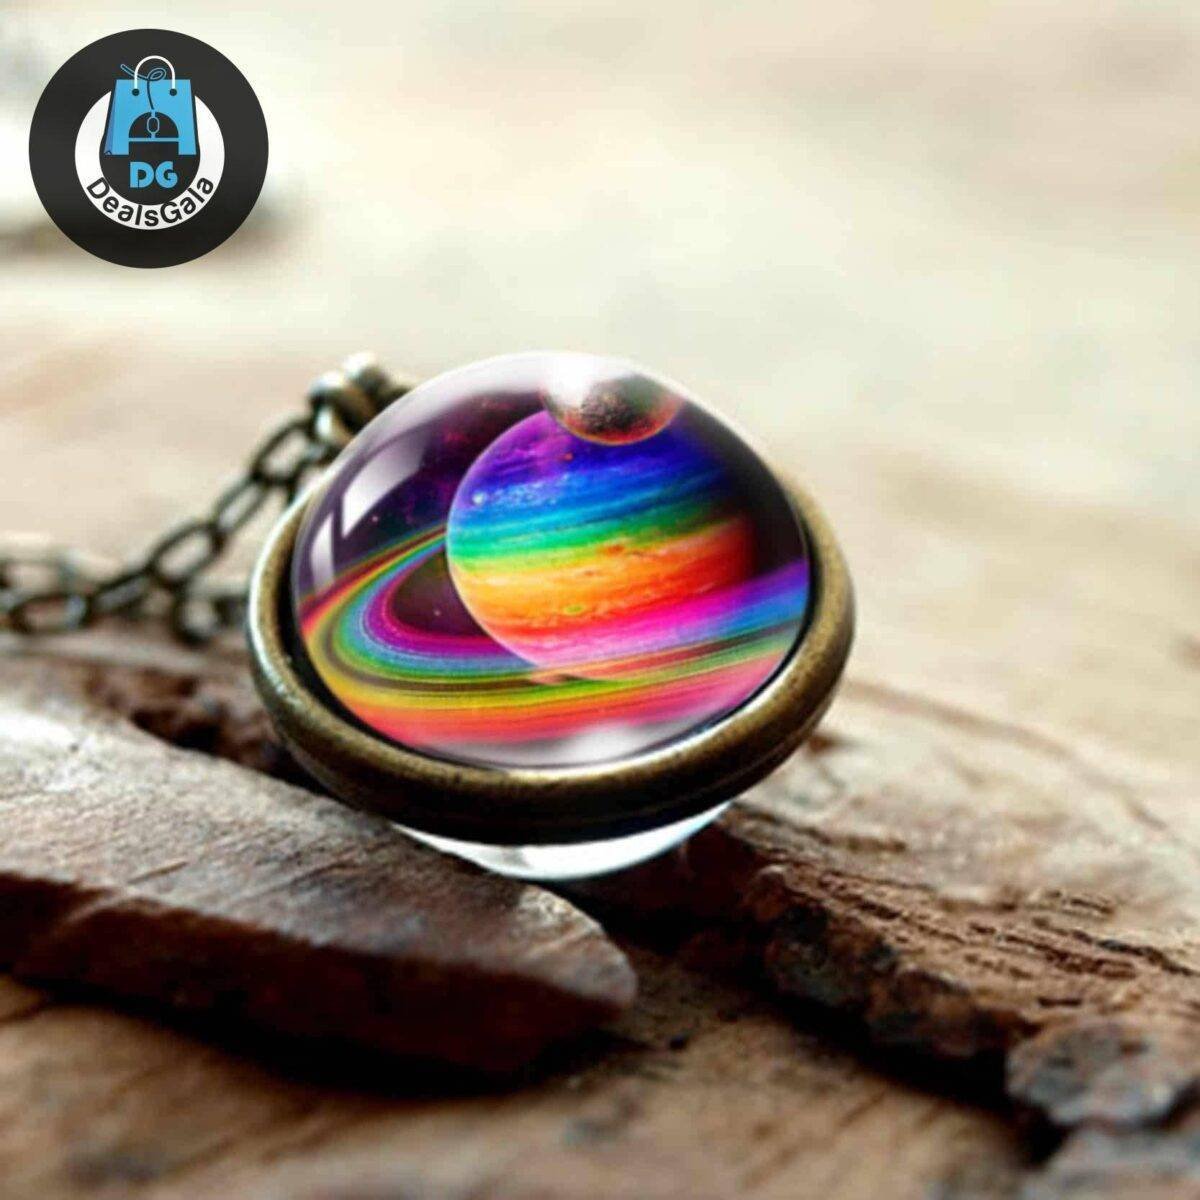 Round Shaped Space Themed Pendant Necklace Necklaces Jewelry Women Jewelry 8d255f28538fbae46aeae7: LGS0030|LGS0030-Luminous|LGS0031|LGS0031-Luminous|LGS0032|LGS0032-Luminous|LGS0033|LGS0033-Luminous|LGS0034|LGS0034-Luminous|LGS0035|LGS0035-Luminous|LGS0036|LGS0036-Luminous|LGS0037|LGS0037-Luminous|LGS0038|LGS0038-Luminous|LGS0039|LGS0039-Luminous